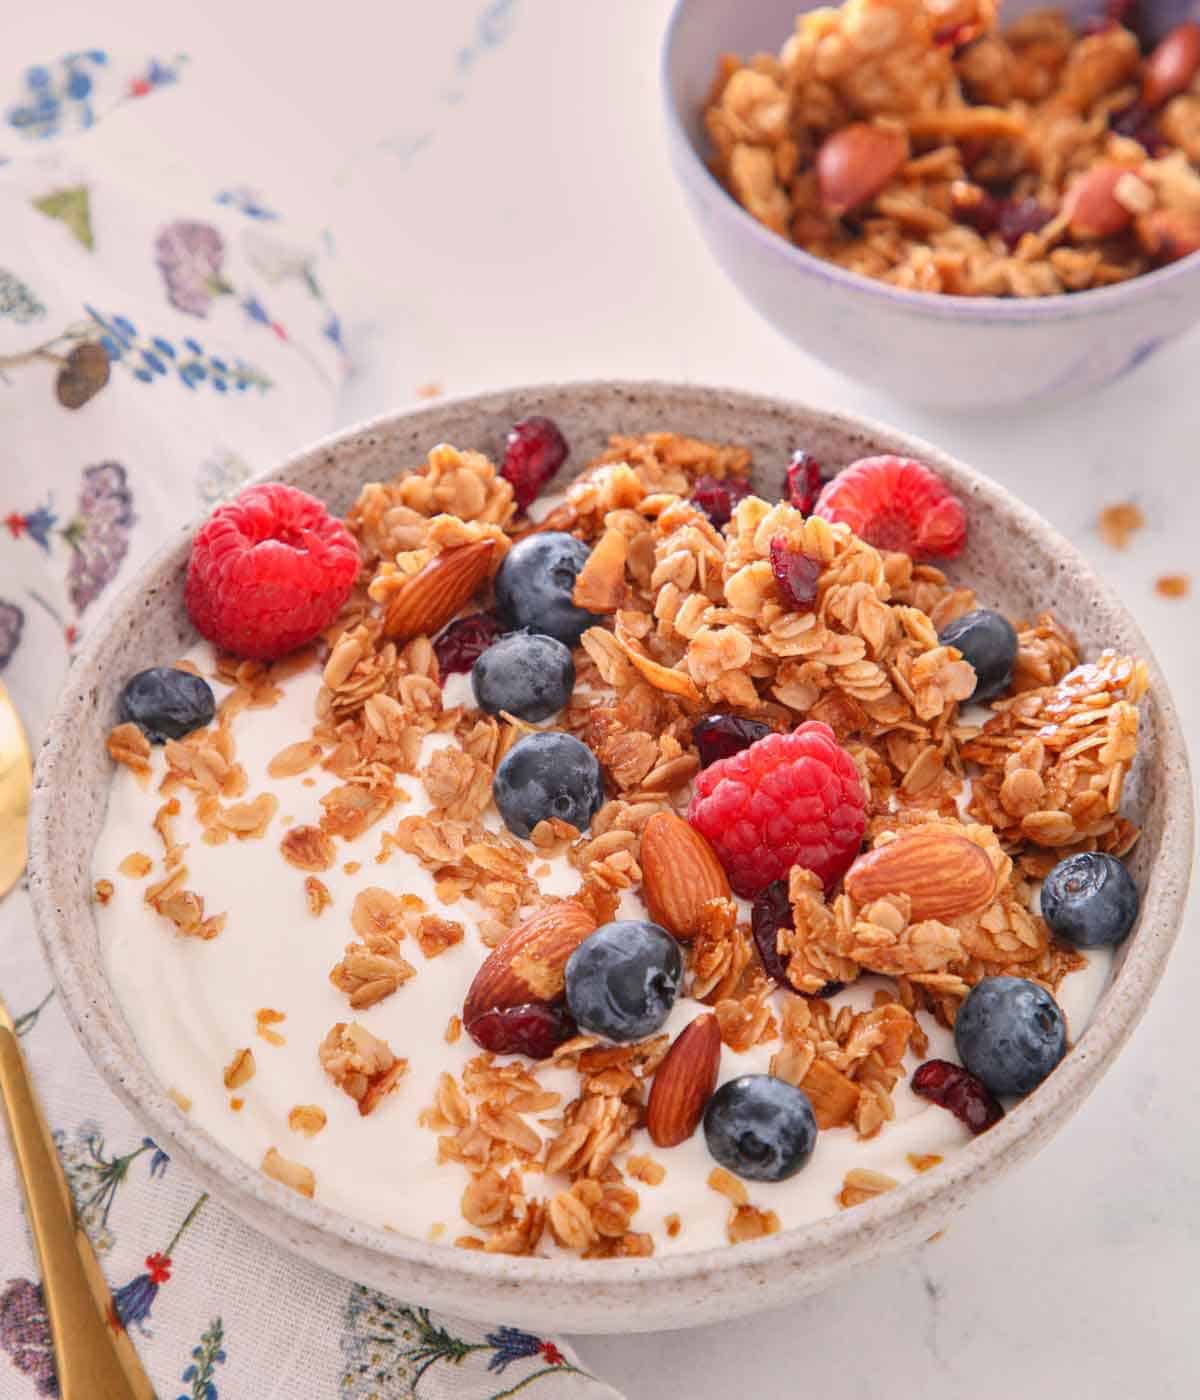 A bowl of yogurt with granola and fresh fruit on top.